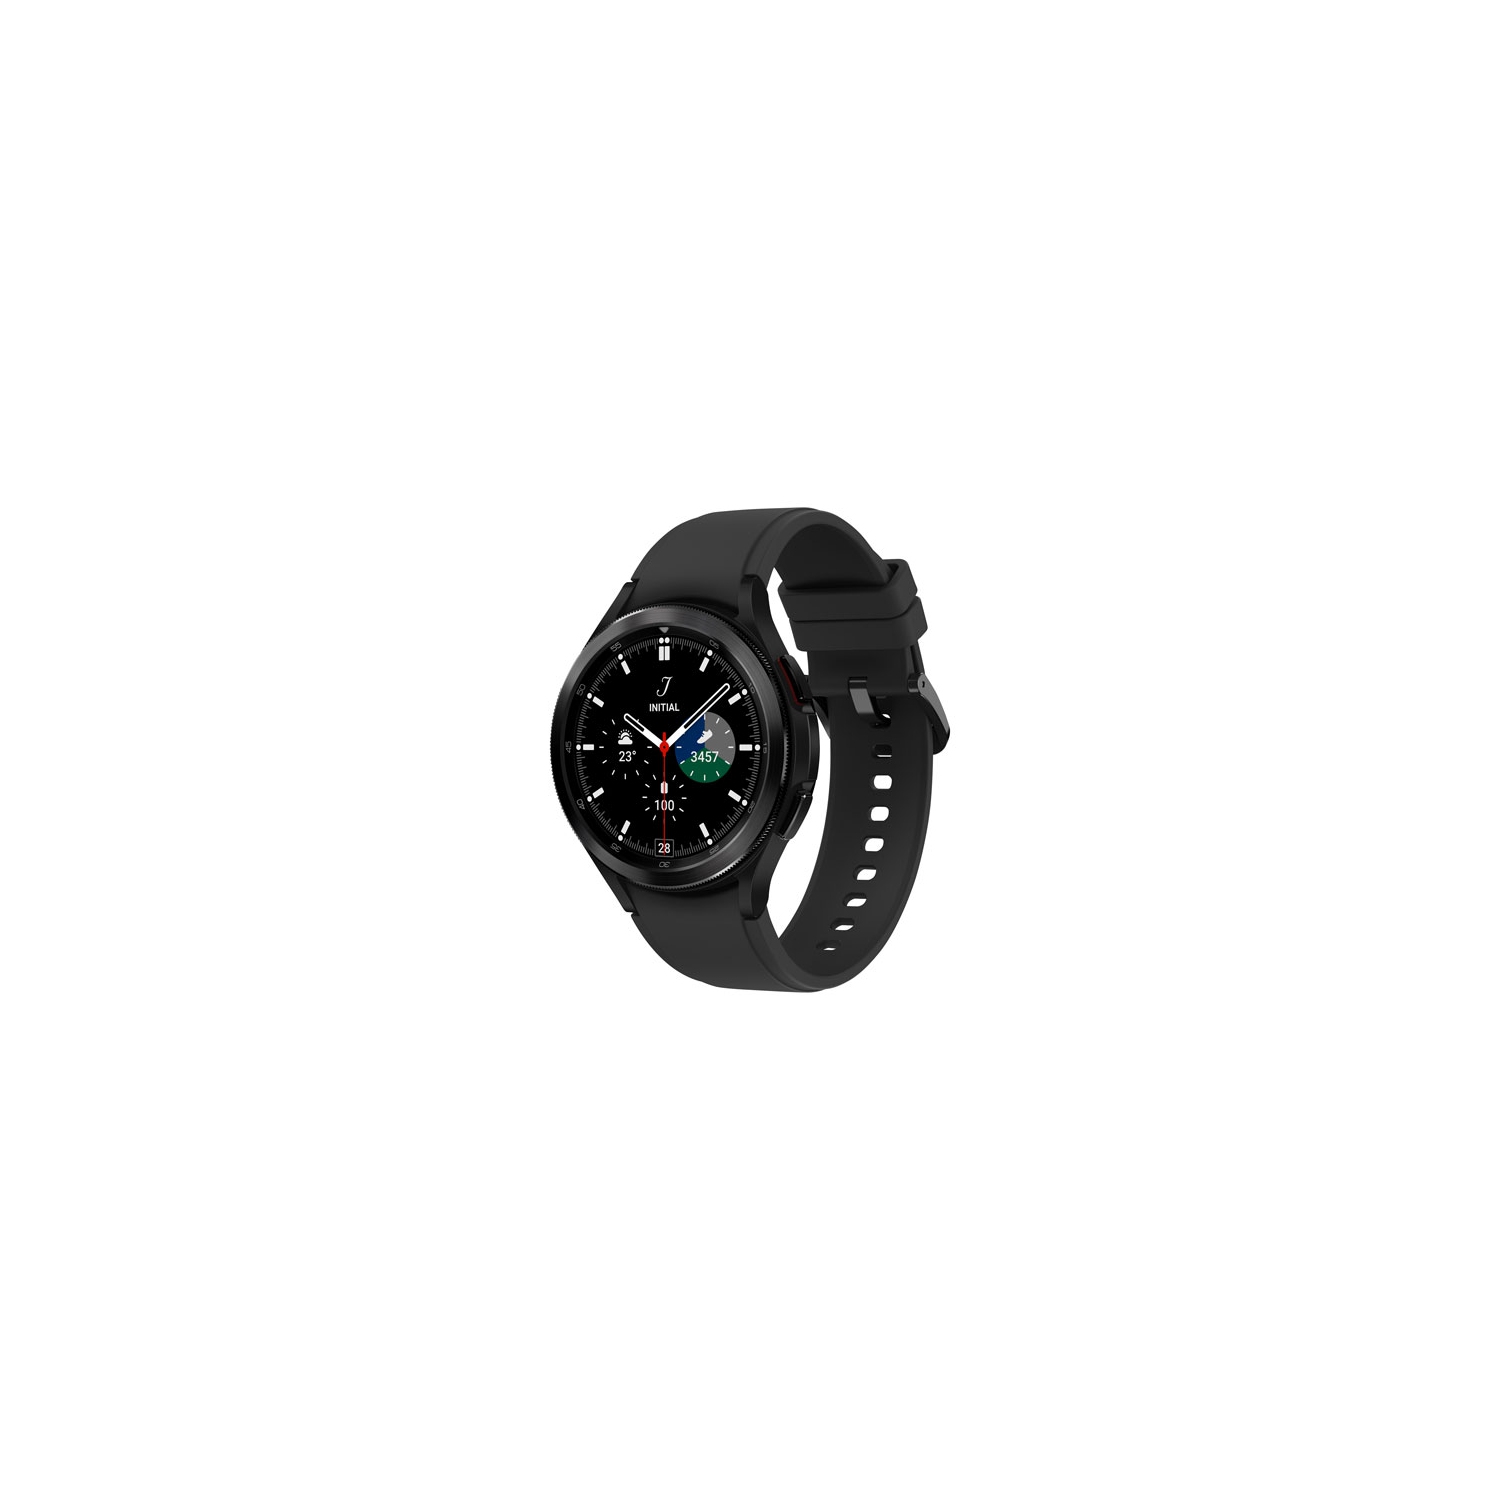 Samsung Galaxy Watch4 Classic 46mm Smartwatch with Heart Rate Monitor - Black - Open Box